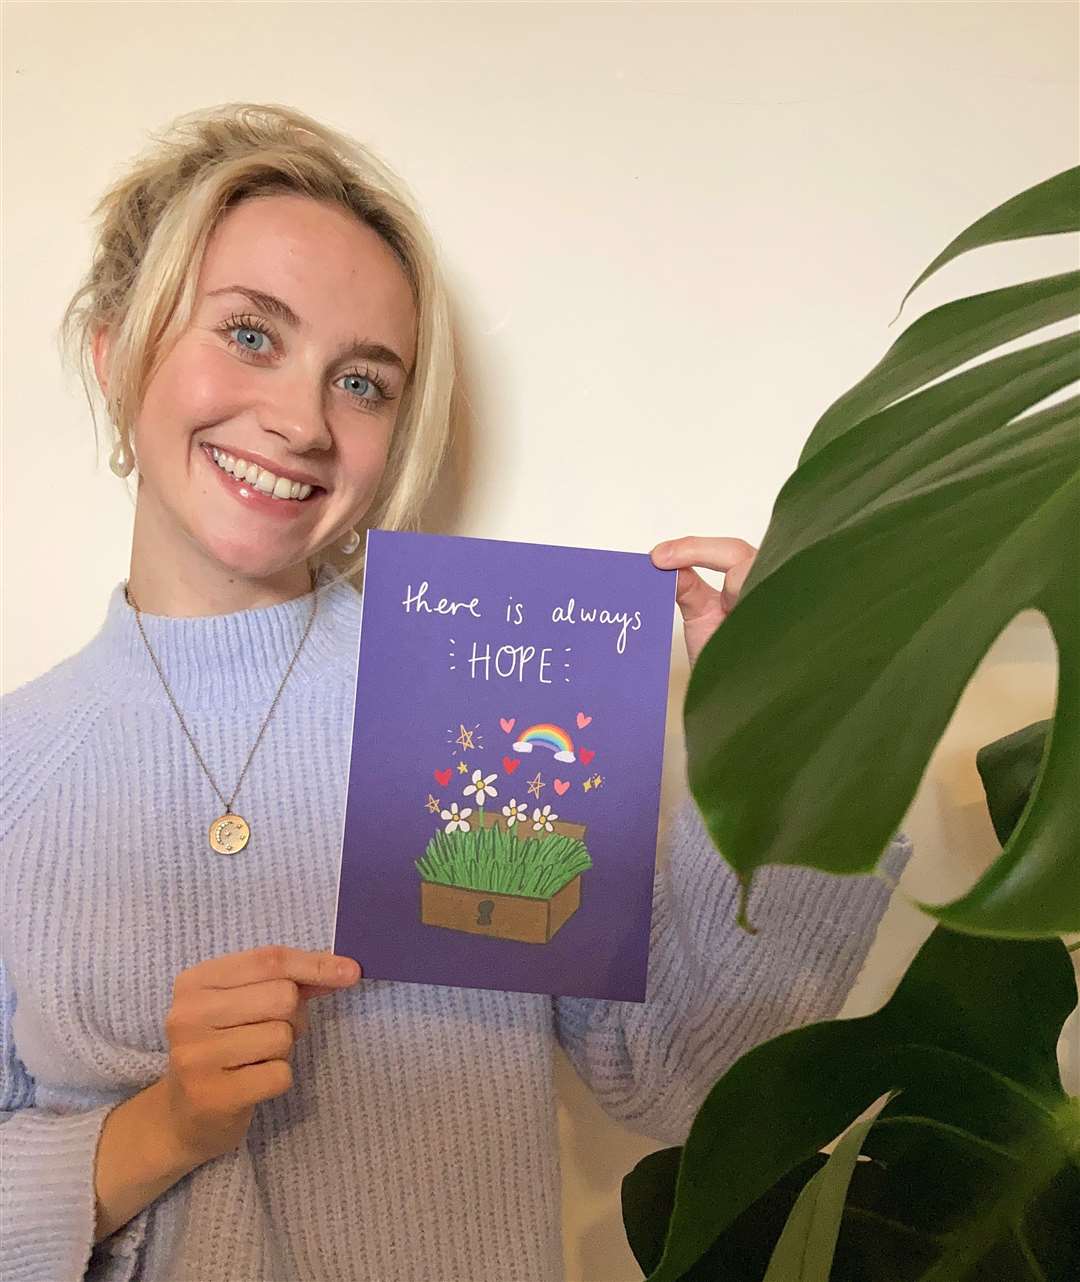 Artist Lucy Watson has created a special card to mark the Pandora Project's tenth anniversary